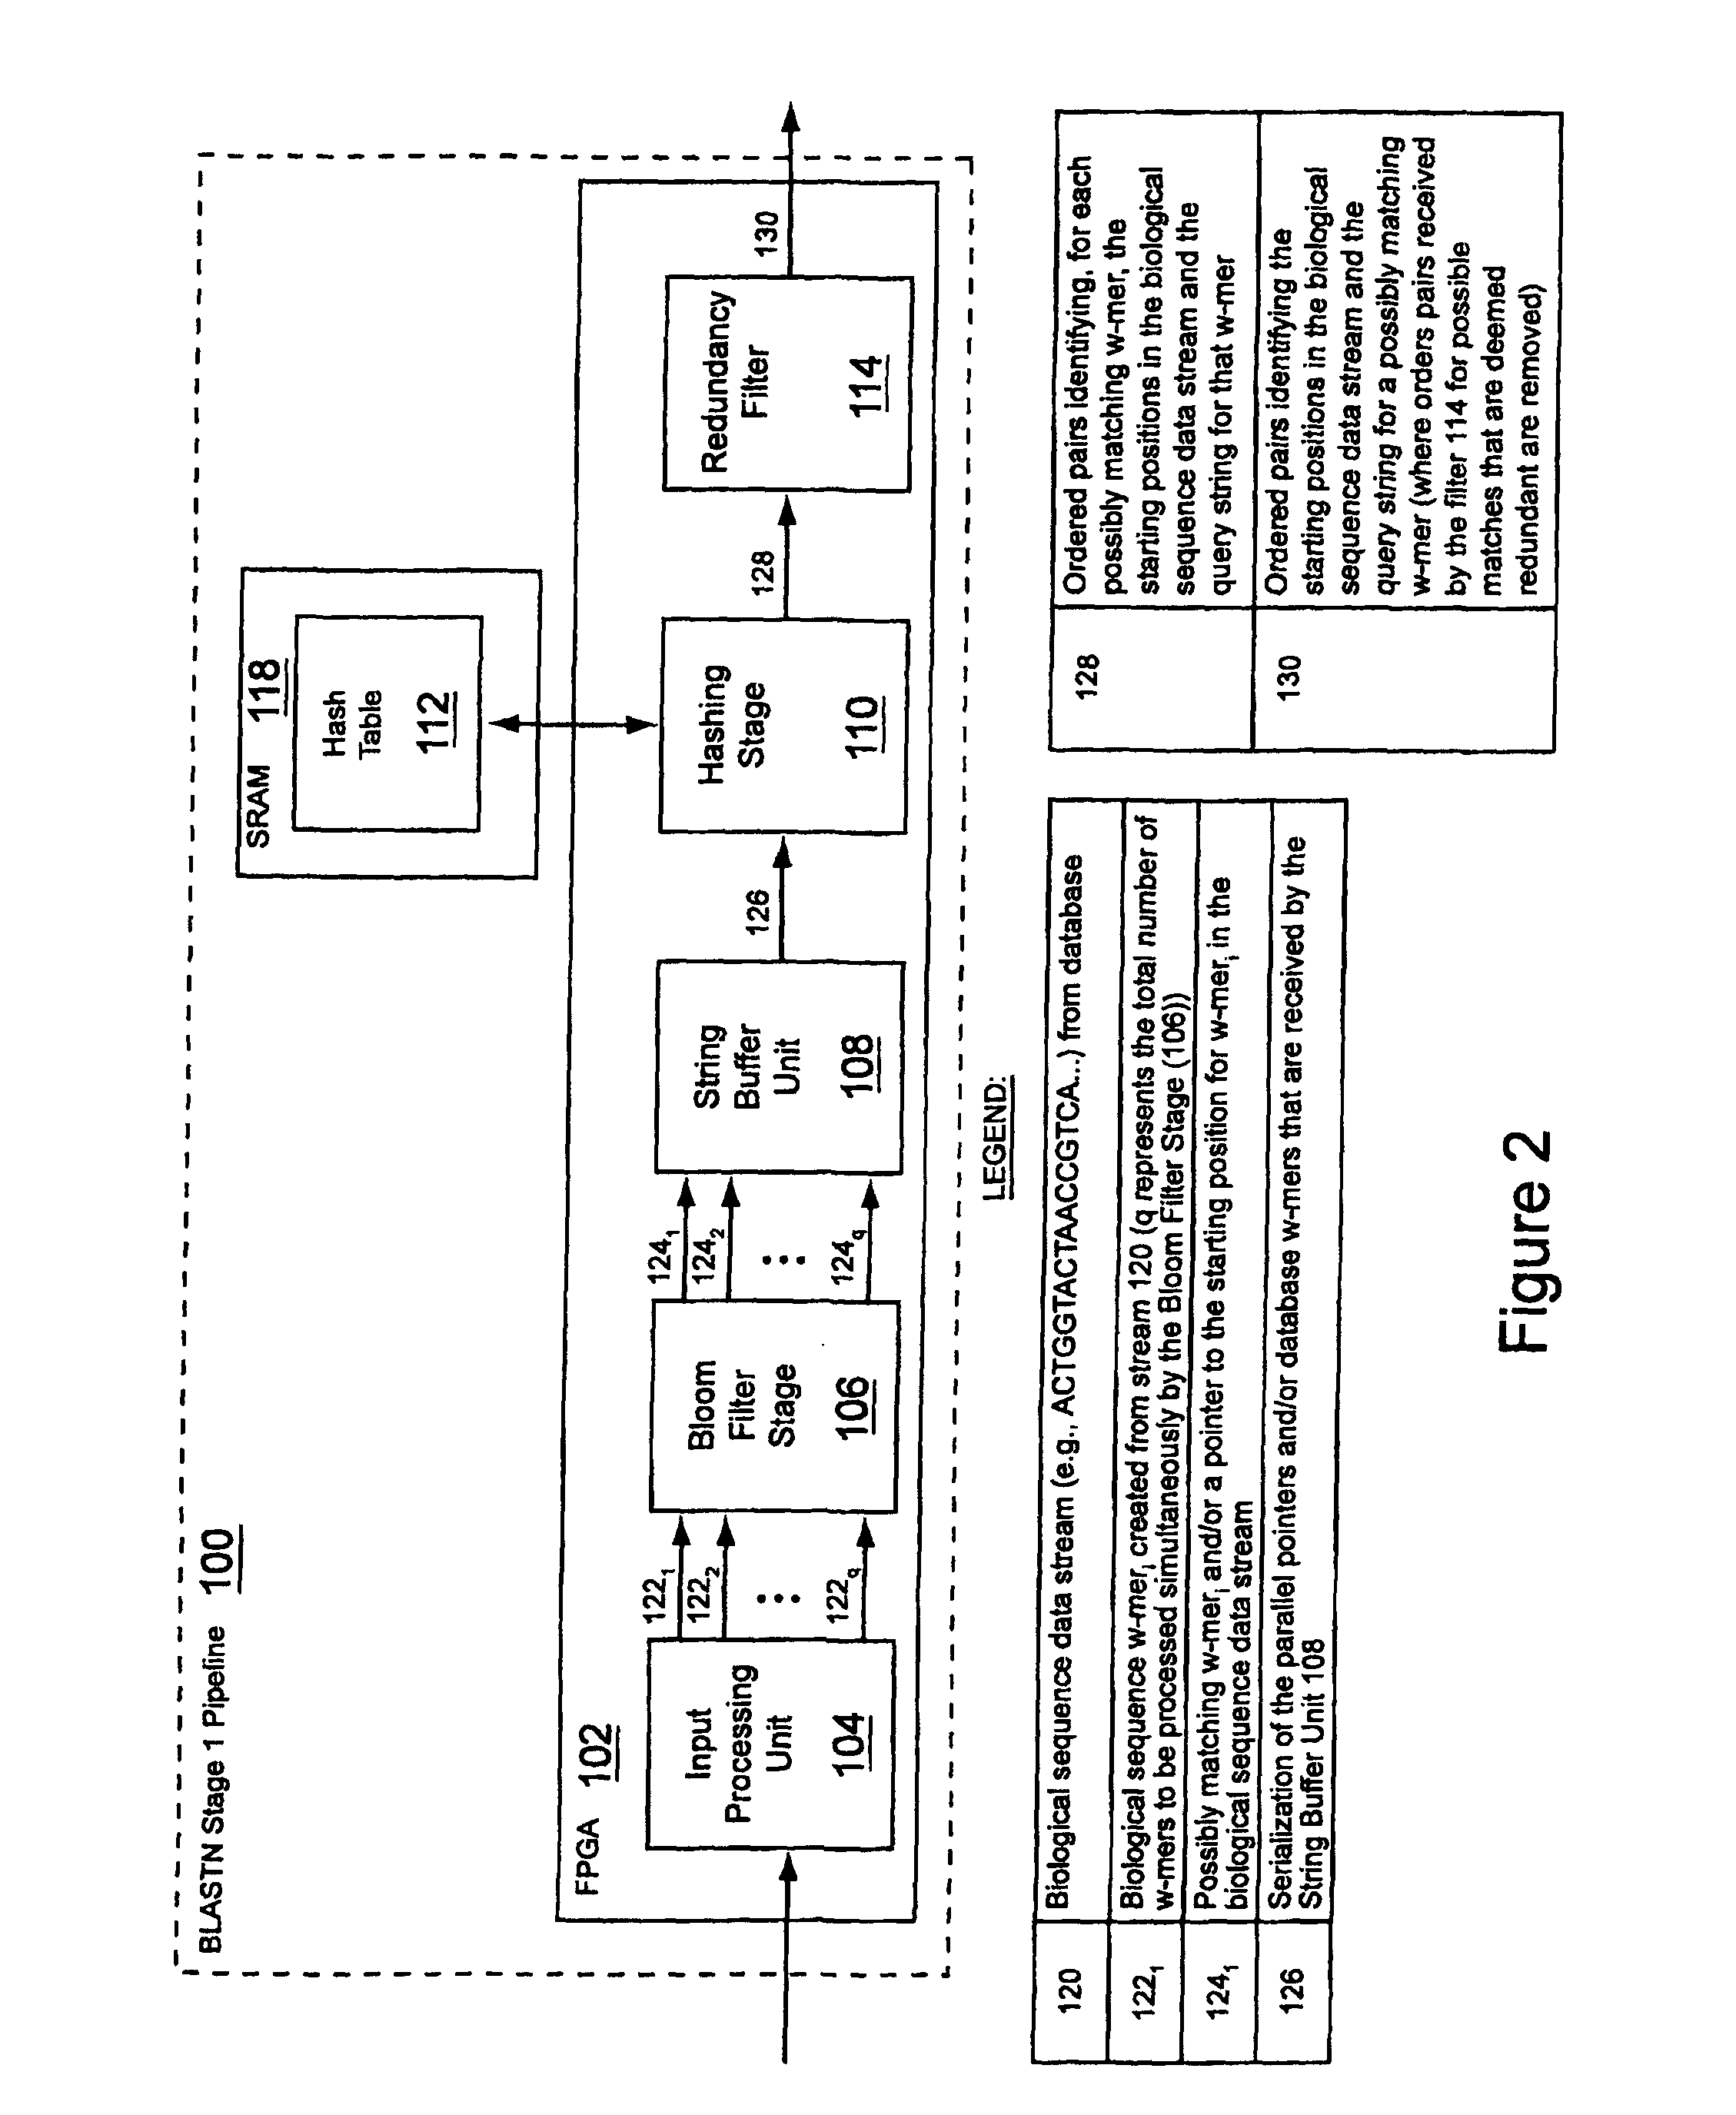 Method and apparatus for performing similarity searching on a data stream with respect to a query string